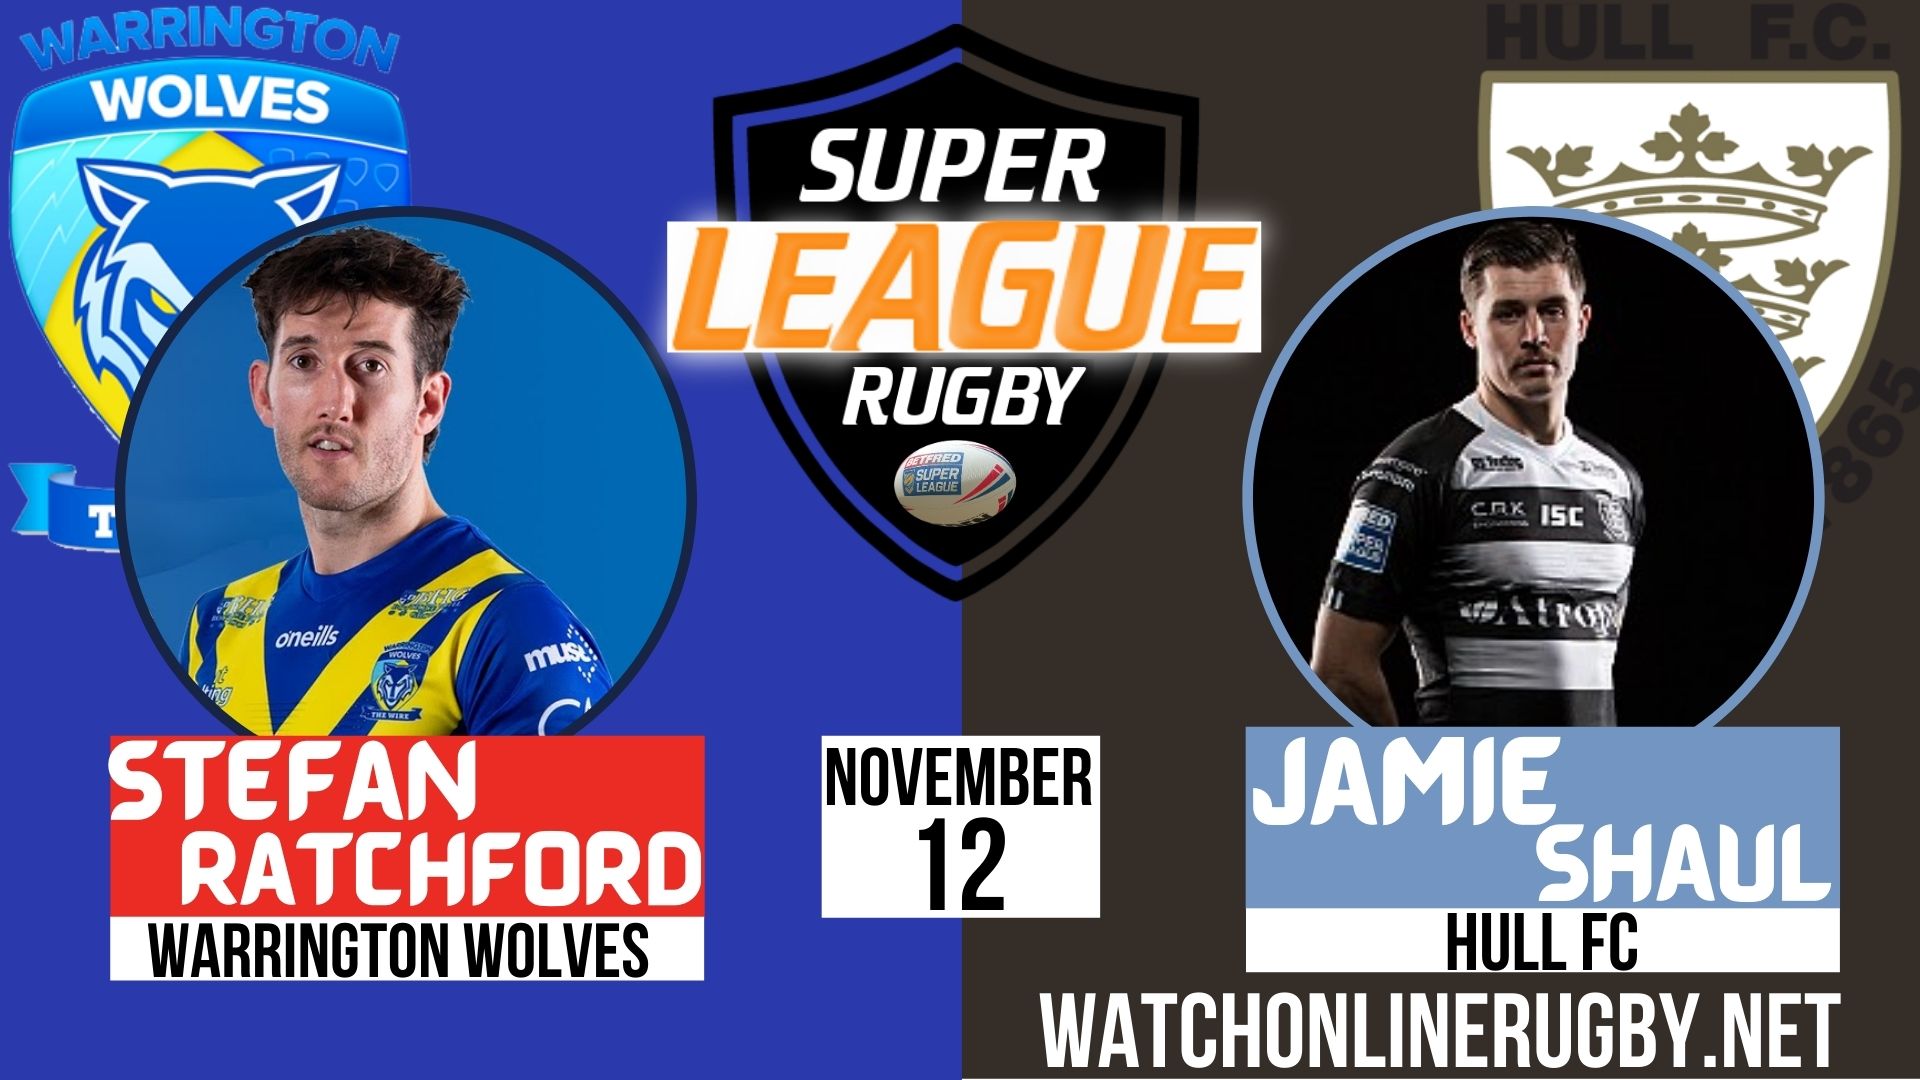 Warrington Wolves vs Hull FC Super League Rugby 2020